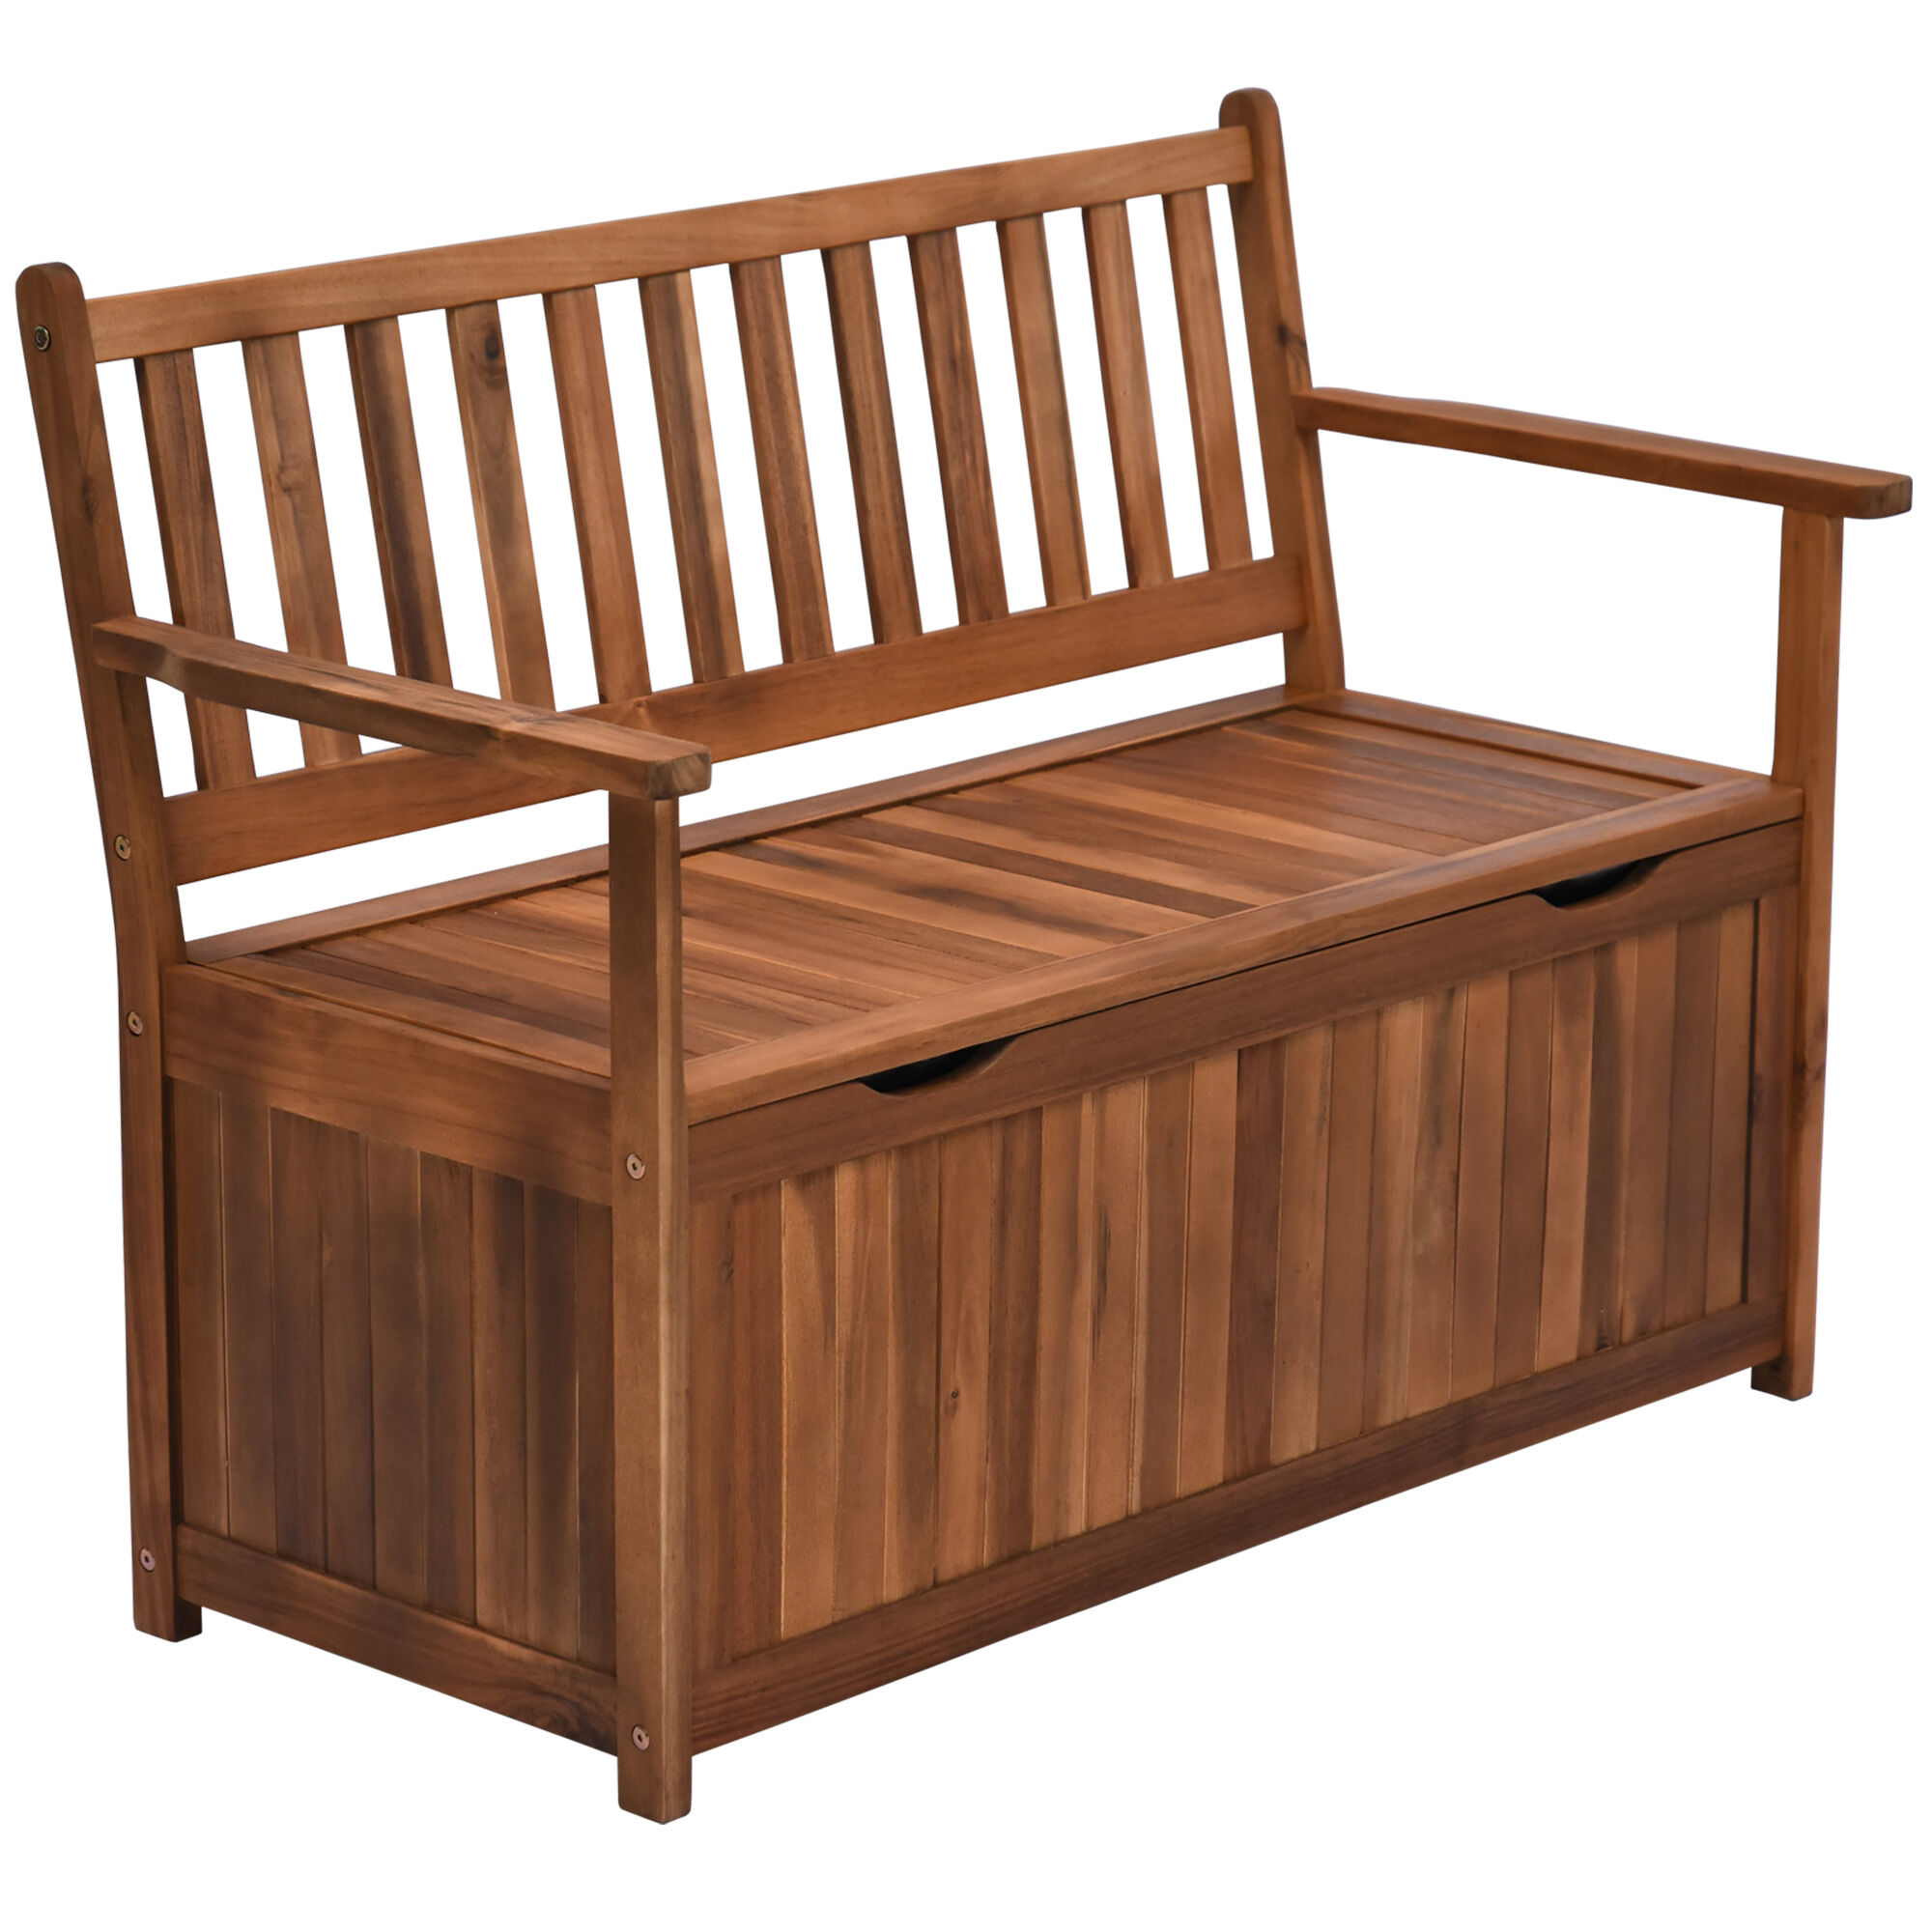 Outsunny Outdoor Storage Bench 41 Gallon Wooden Deck Box Teak with PE Lining Perfect for Garden Tools   Aosom.com